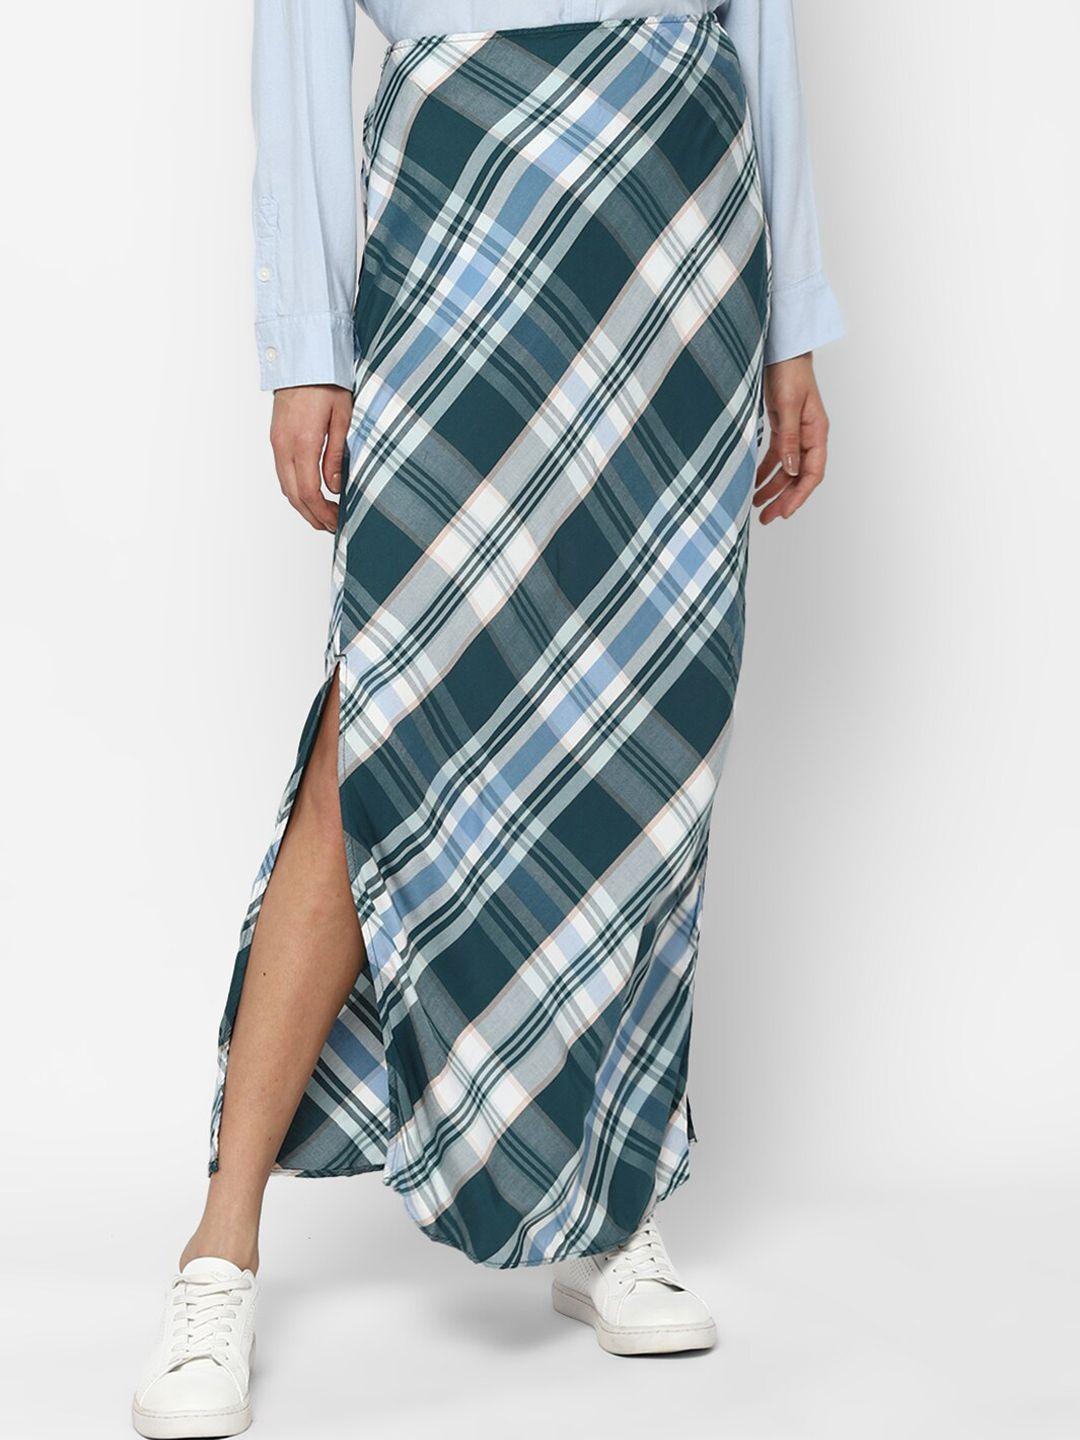 AMERICAN EAGLE OUTFITTERS Women Green & White Checked Straight Maxi Skirt